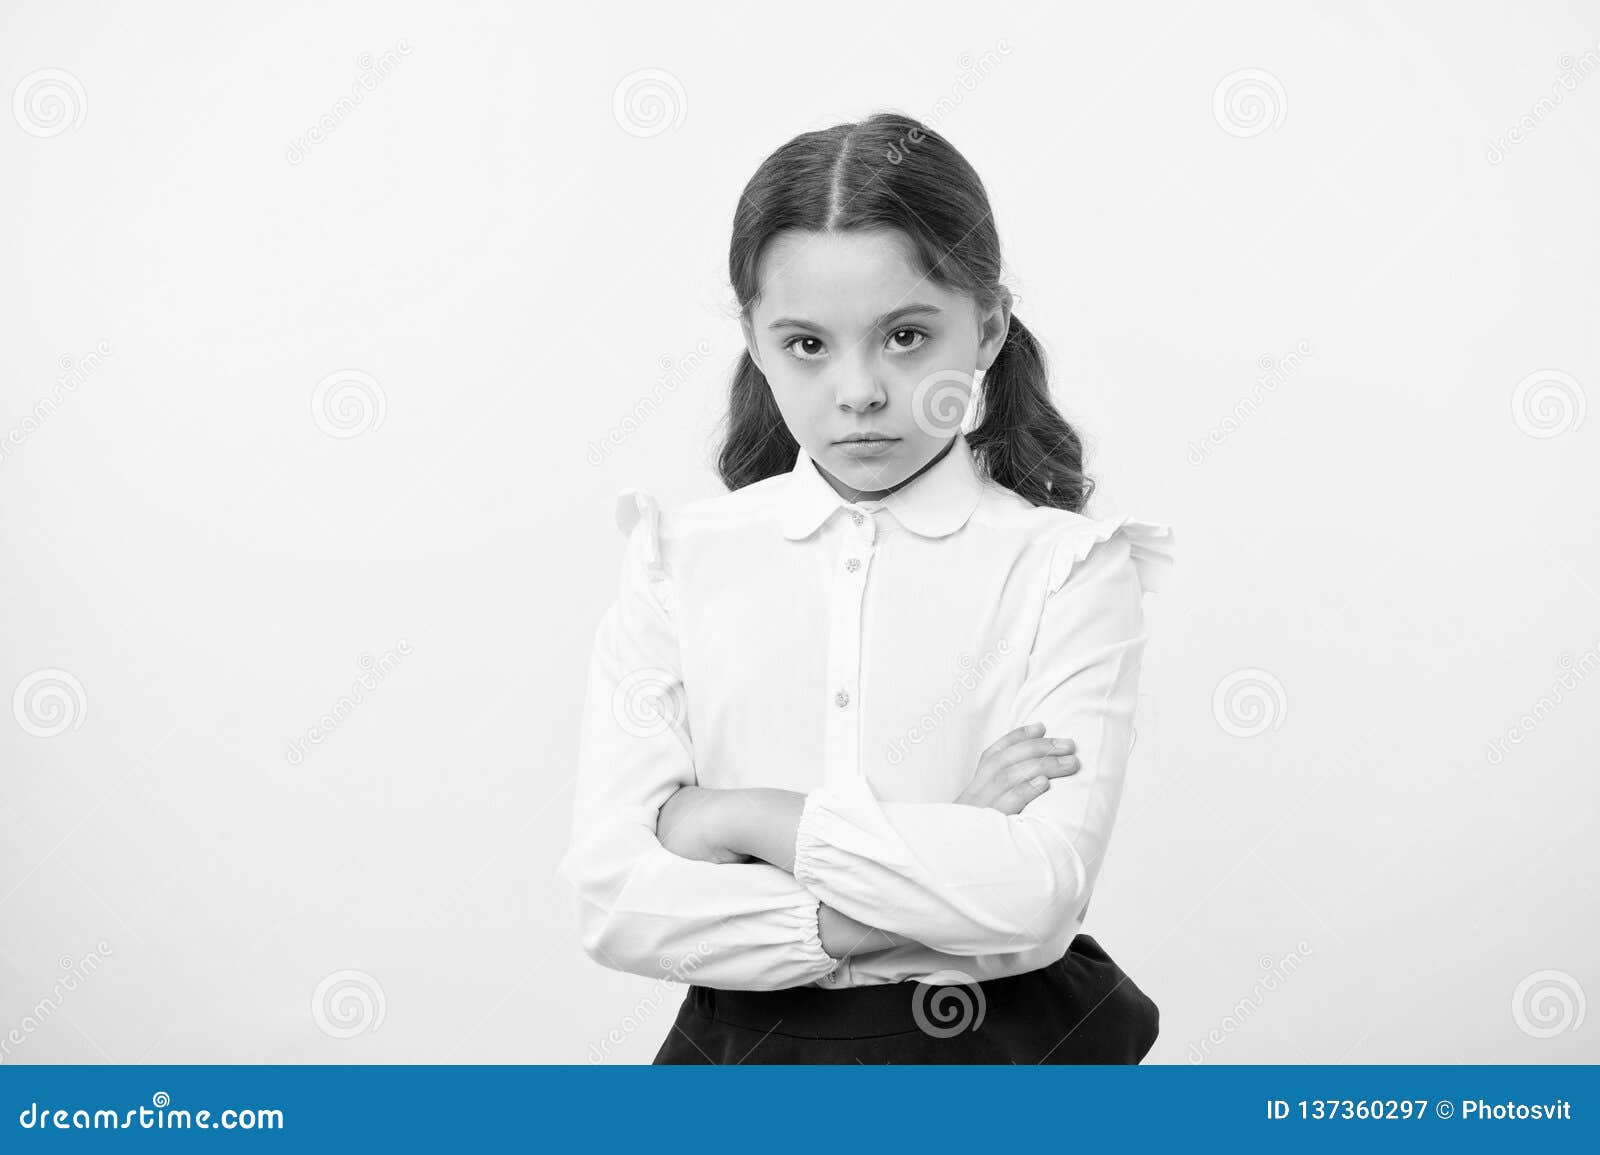 disagreement and stubbornness. girl school uniform serious face offended yellow background. kid unhappy looks strictly